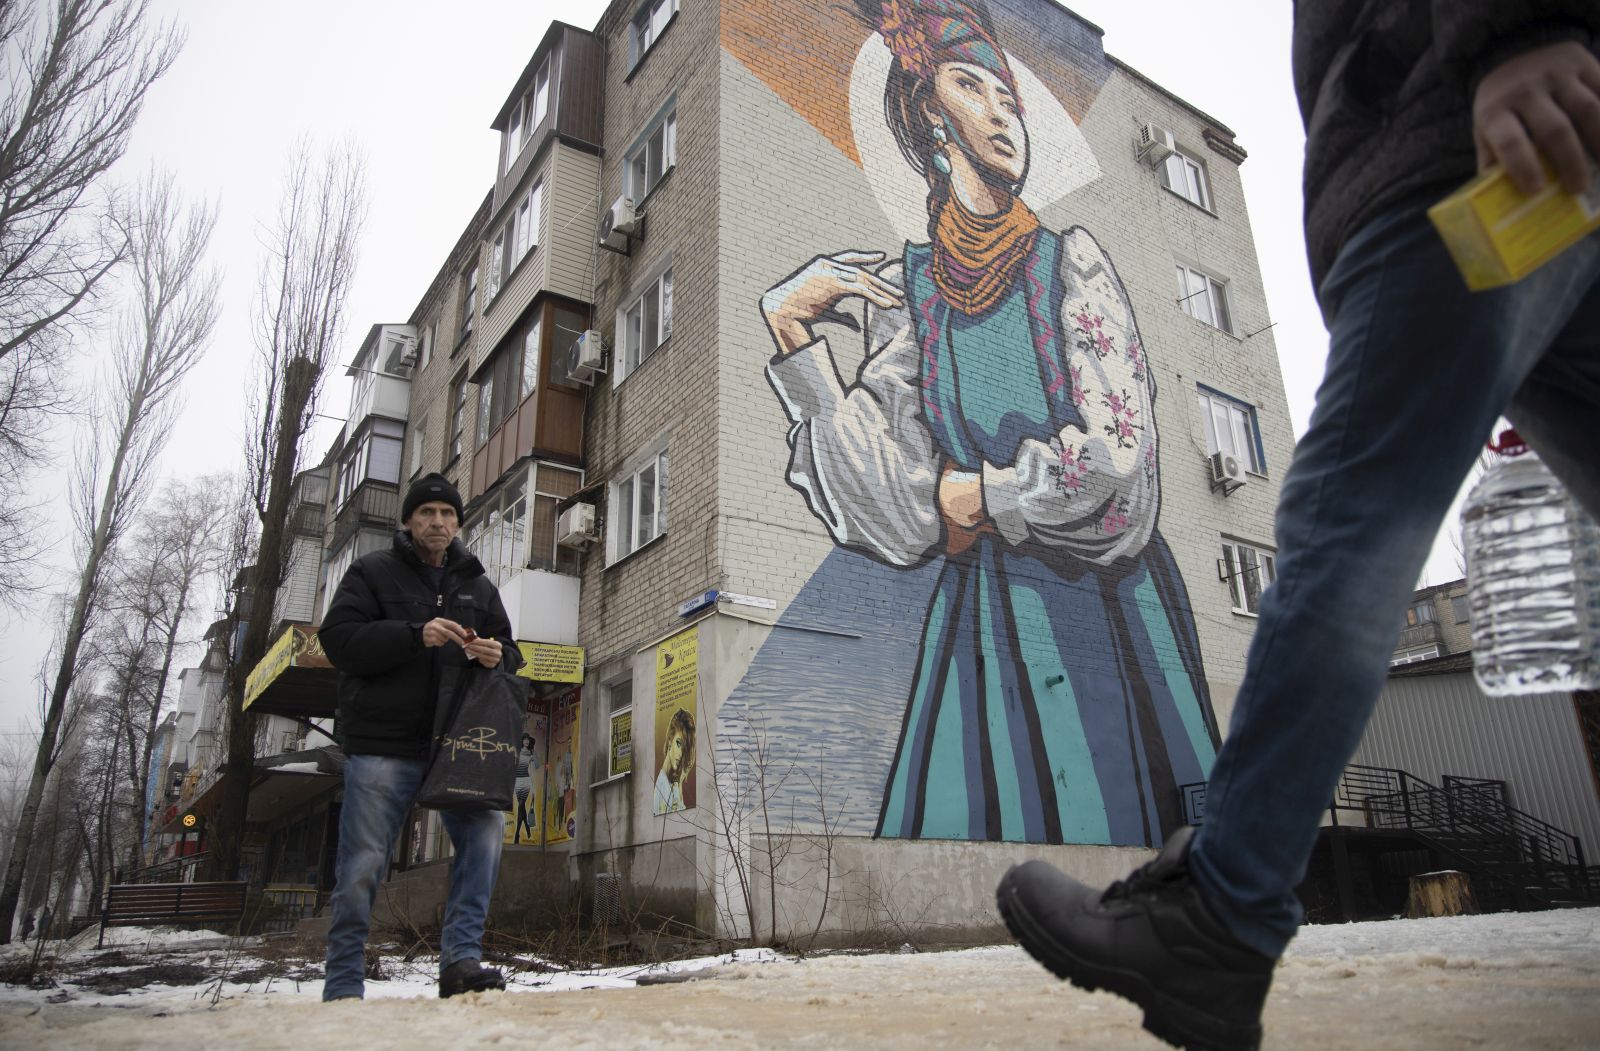 epa09725712 Locals walk in a street in front of a big mural on a building wall in the small Ukrainian city of Avdiivka not far from the pro-Russian militants-controlled city of Donetsk, Ukraine, 03 February 2022. Locals adapted to live a normal life not far from a front line amid escalation on the Ukraine - Russian border.  EPA/STANISLAV KOZLIUK